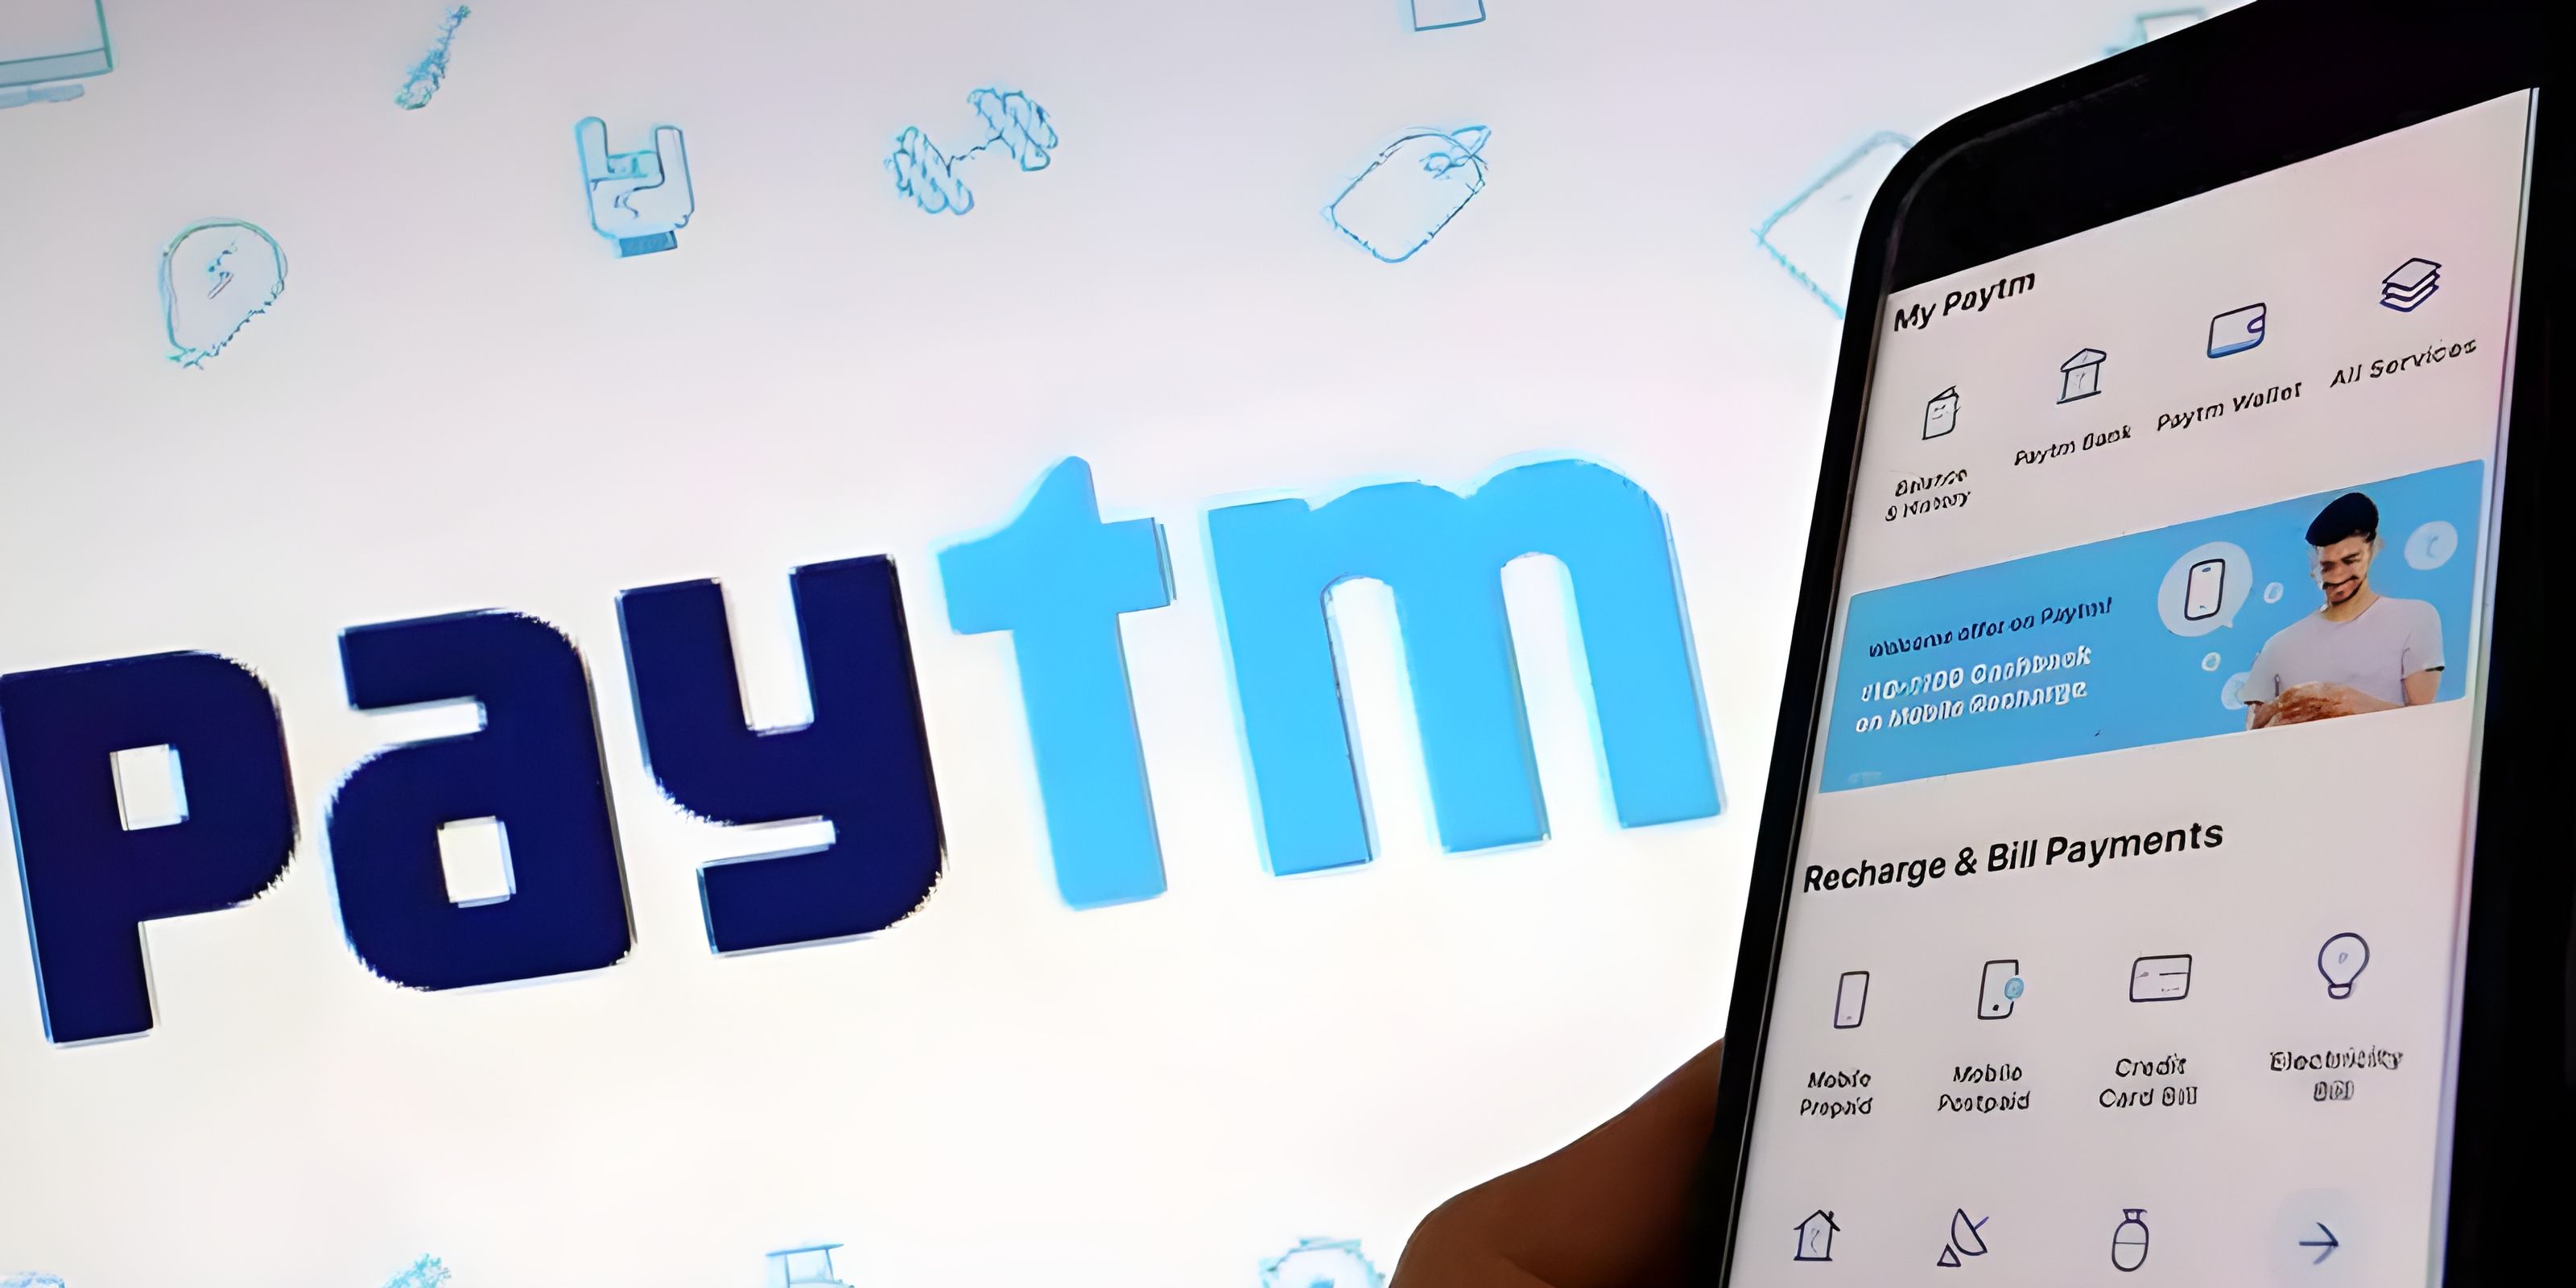 Morgan Stanley buys shares of Paytm parent firm worth Rs 244 Cr